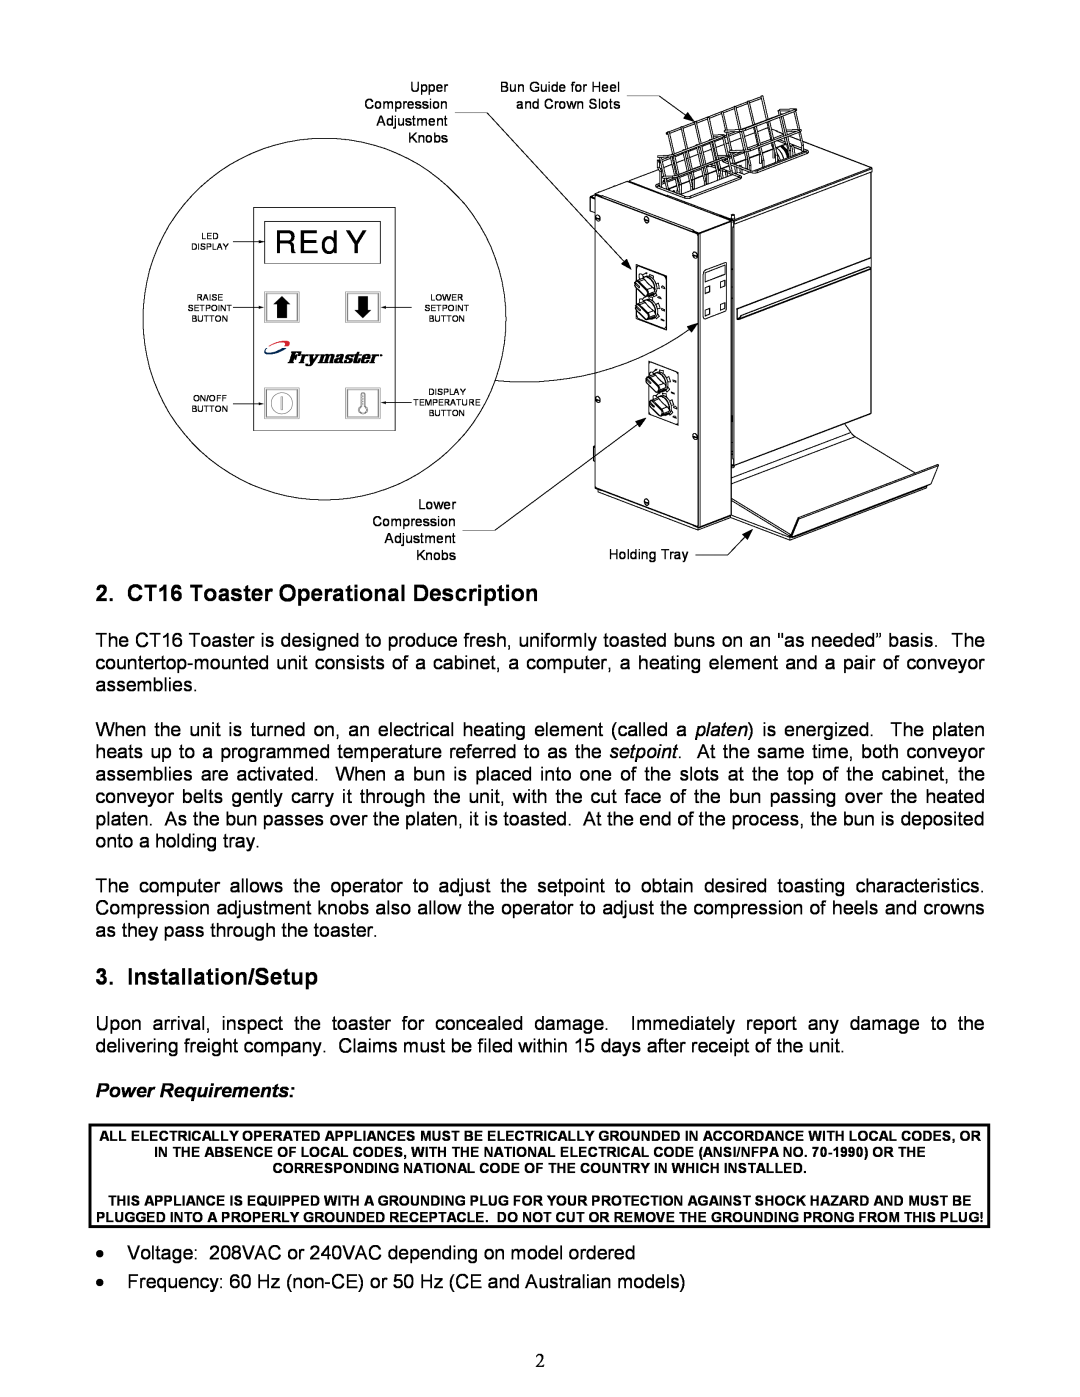 Frymaster operation manual REdY, 2. CT16 Toaster Operational Description, Installation/Setup, Power Requirements 